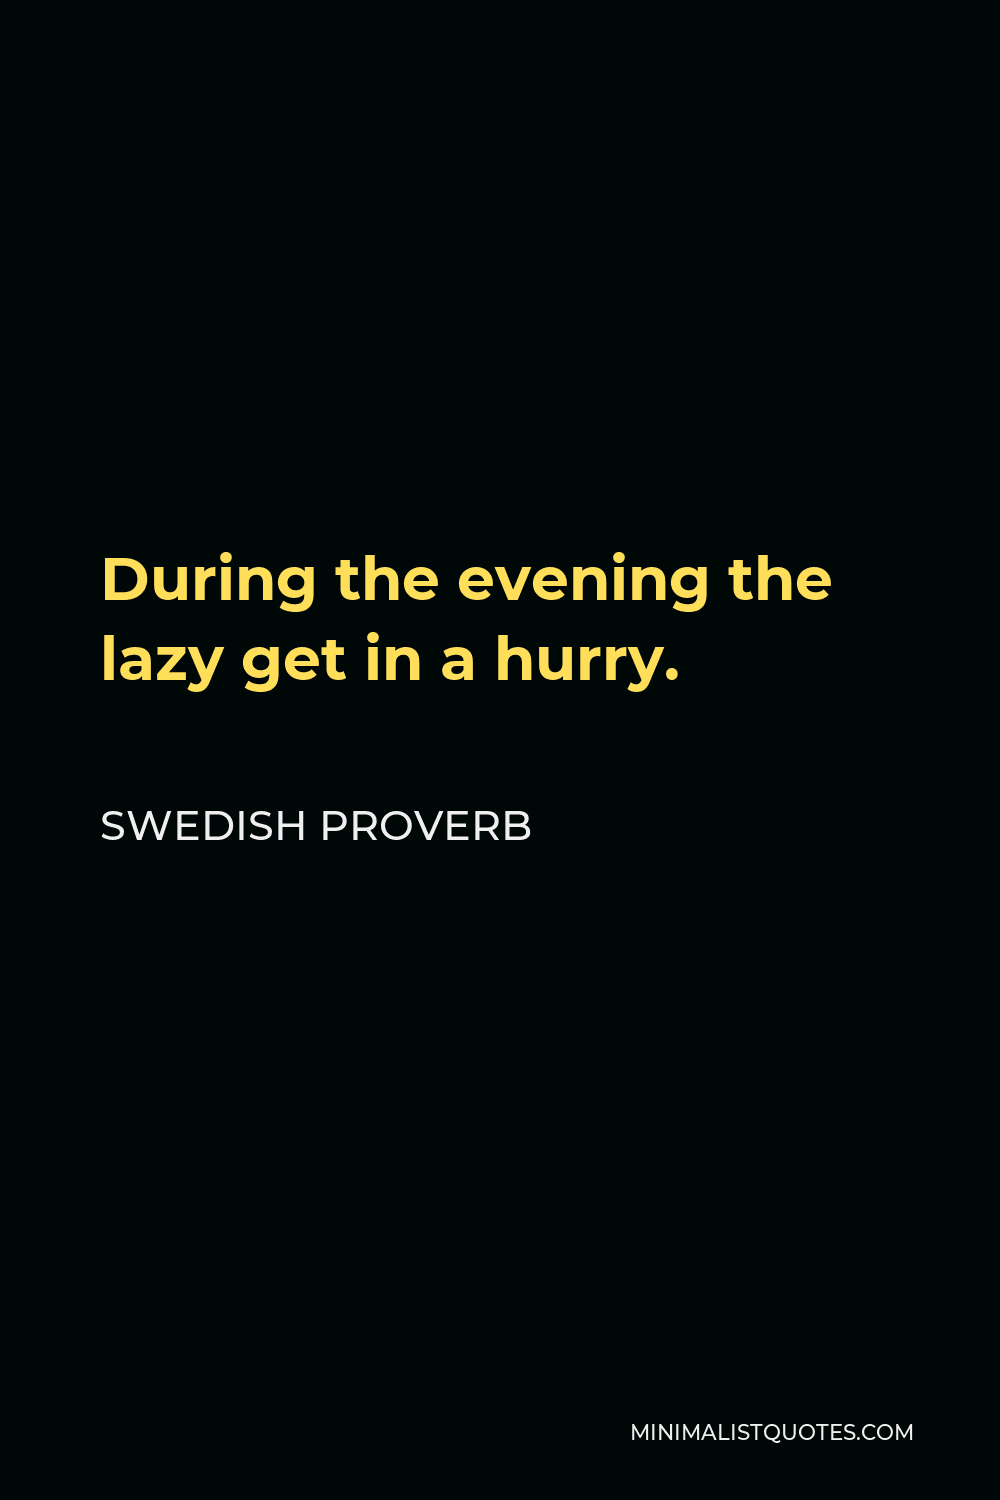 Swedish Proverb Quote - During the evening the lazy get in a hurry.